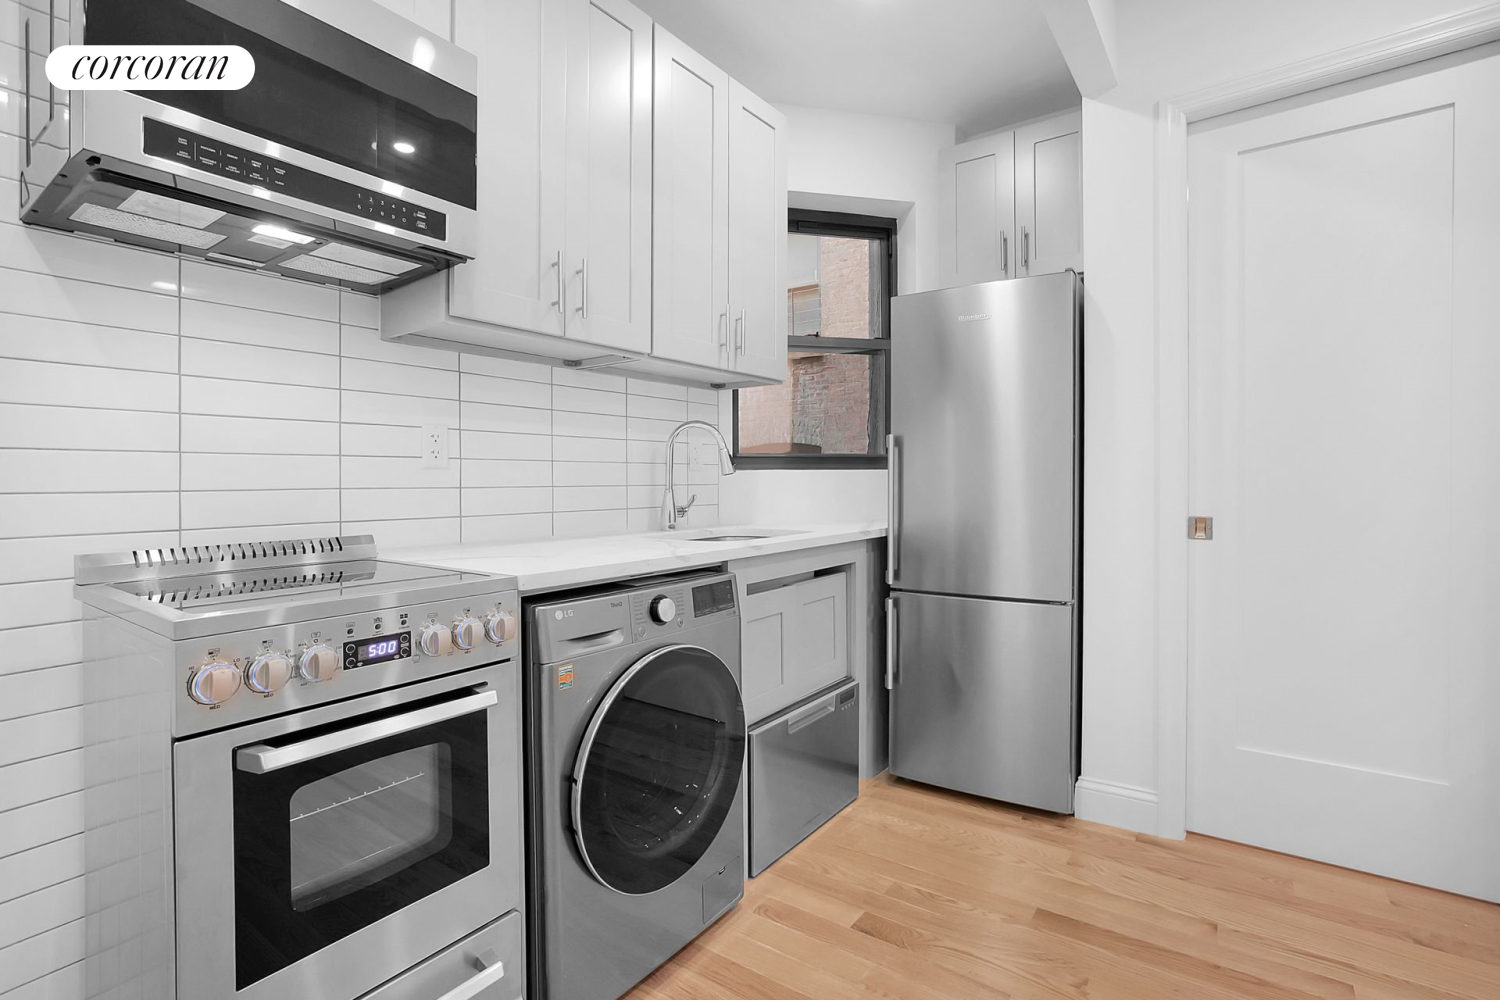 542 East 82nd Street 8, Yorkville, Upper East Side, NYC - 3 Bedrooms  
1 Bathrooms  
4 Rooms - 